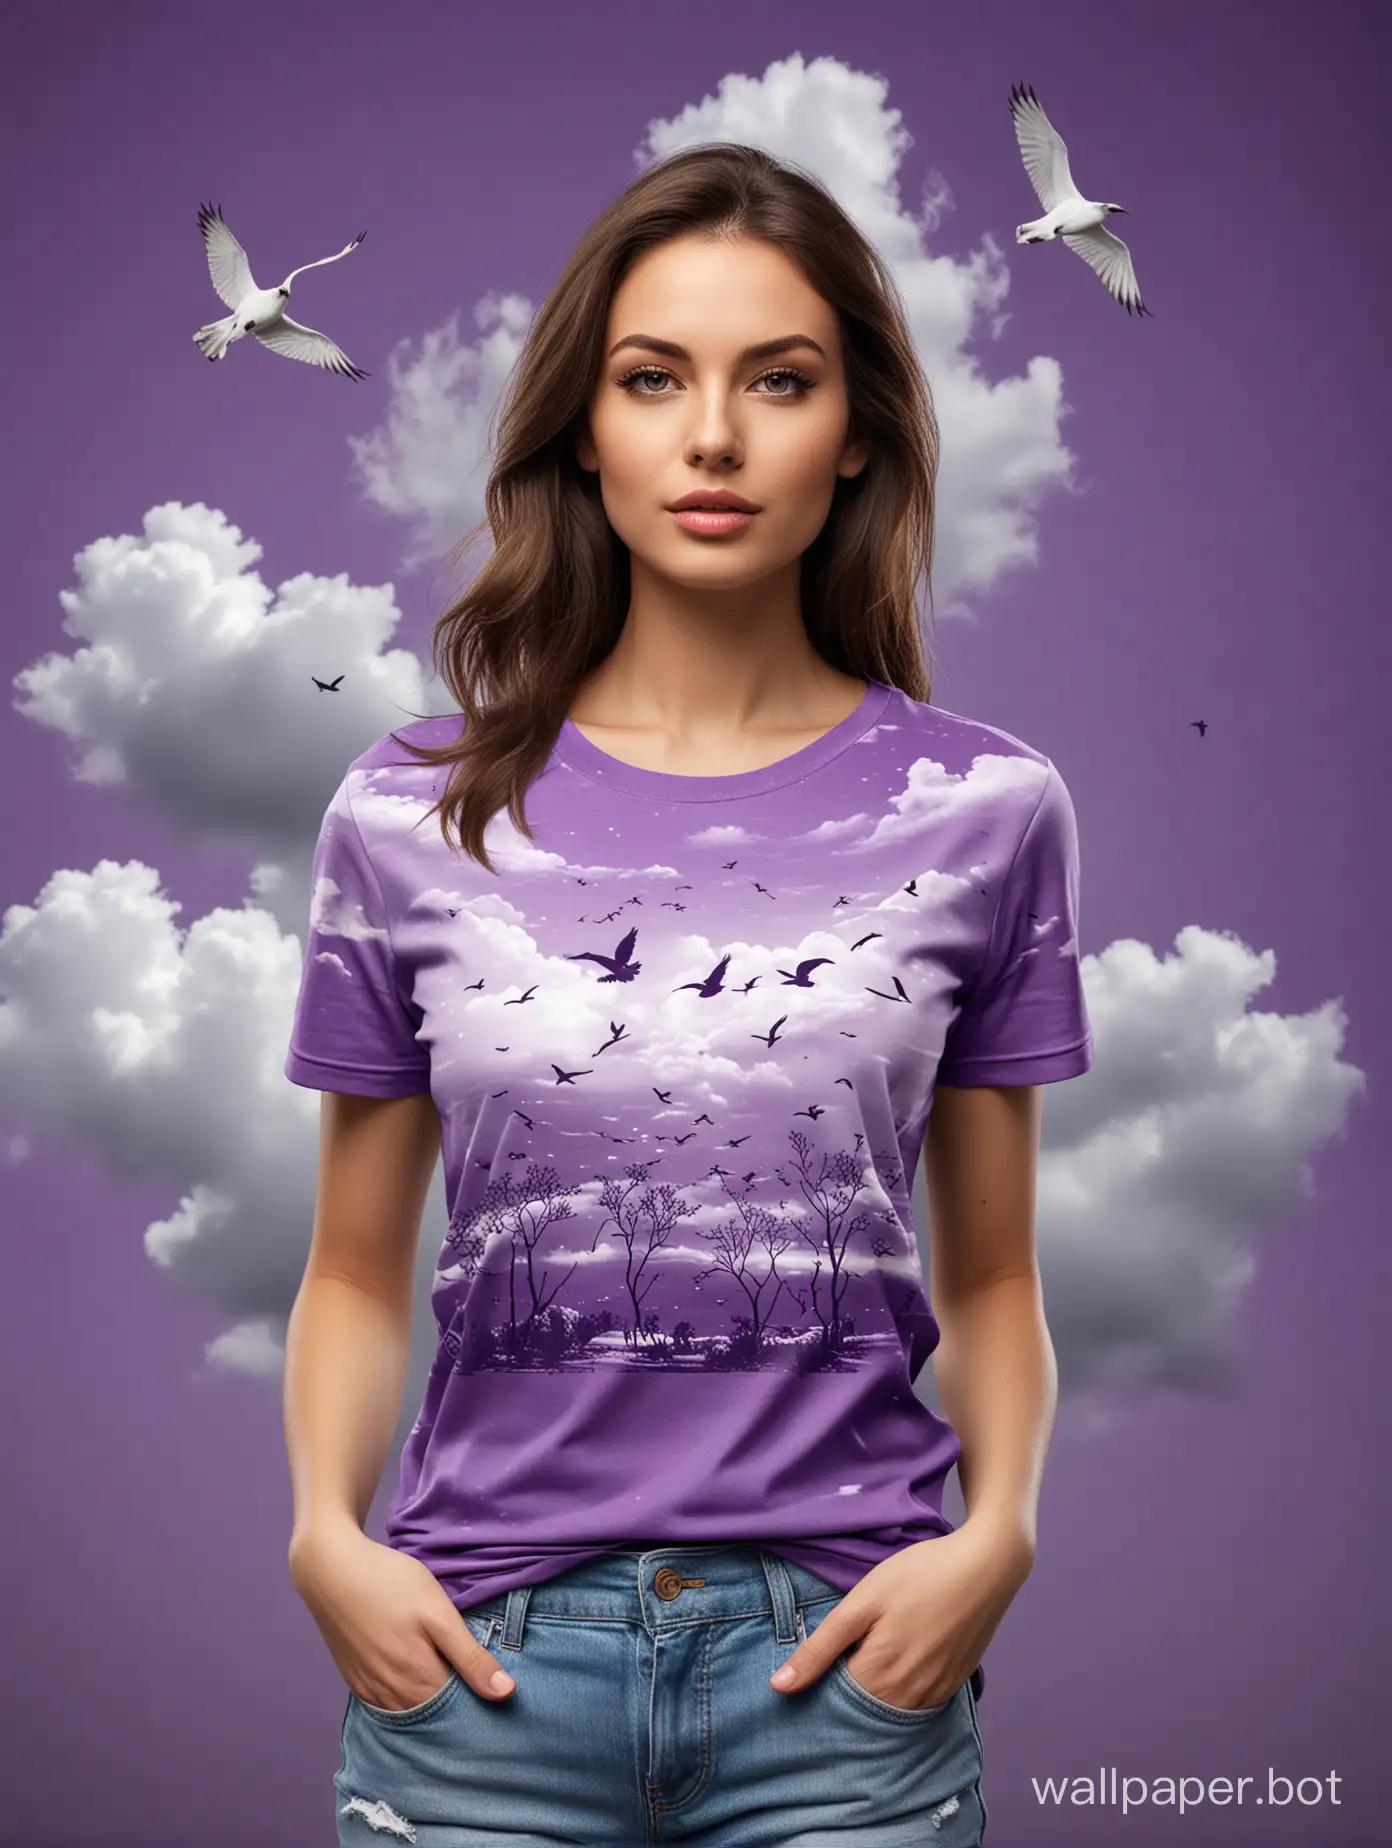 Beautiful-Woman-TShirt-Mockup-with-Birds-Illustration-Against-Dramatic-Cloudy-Sky